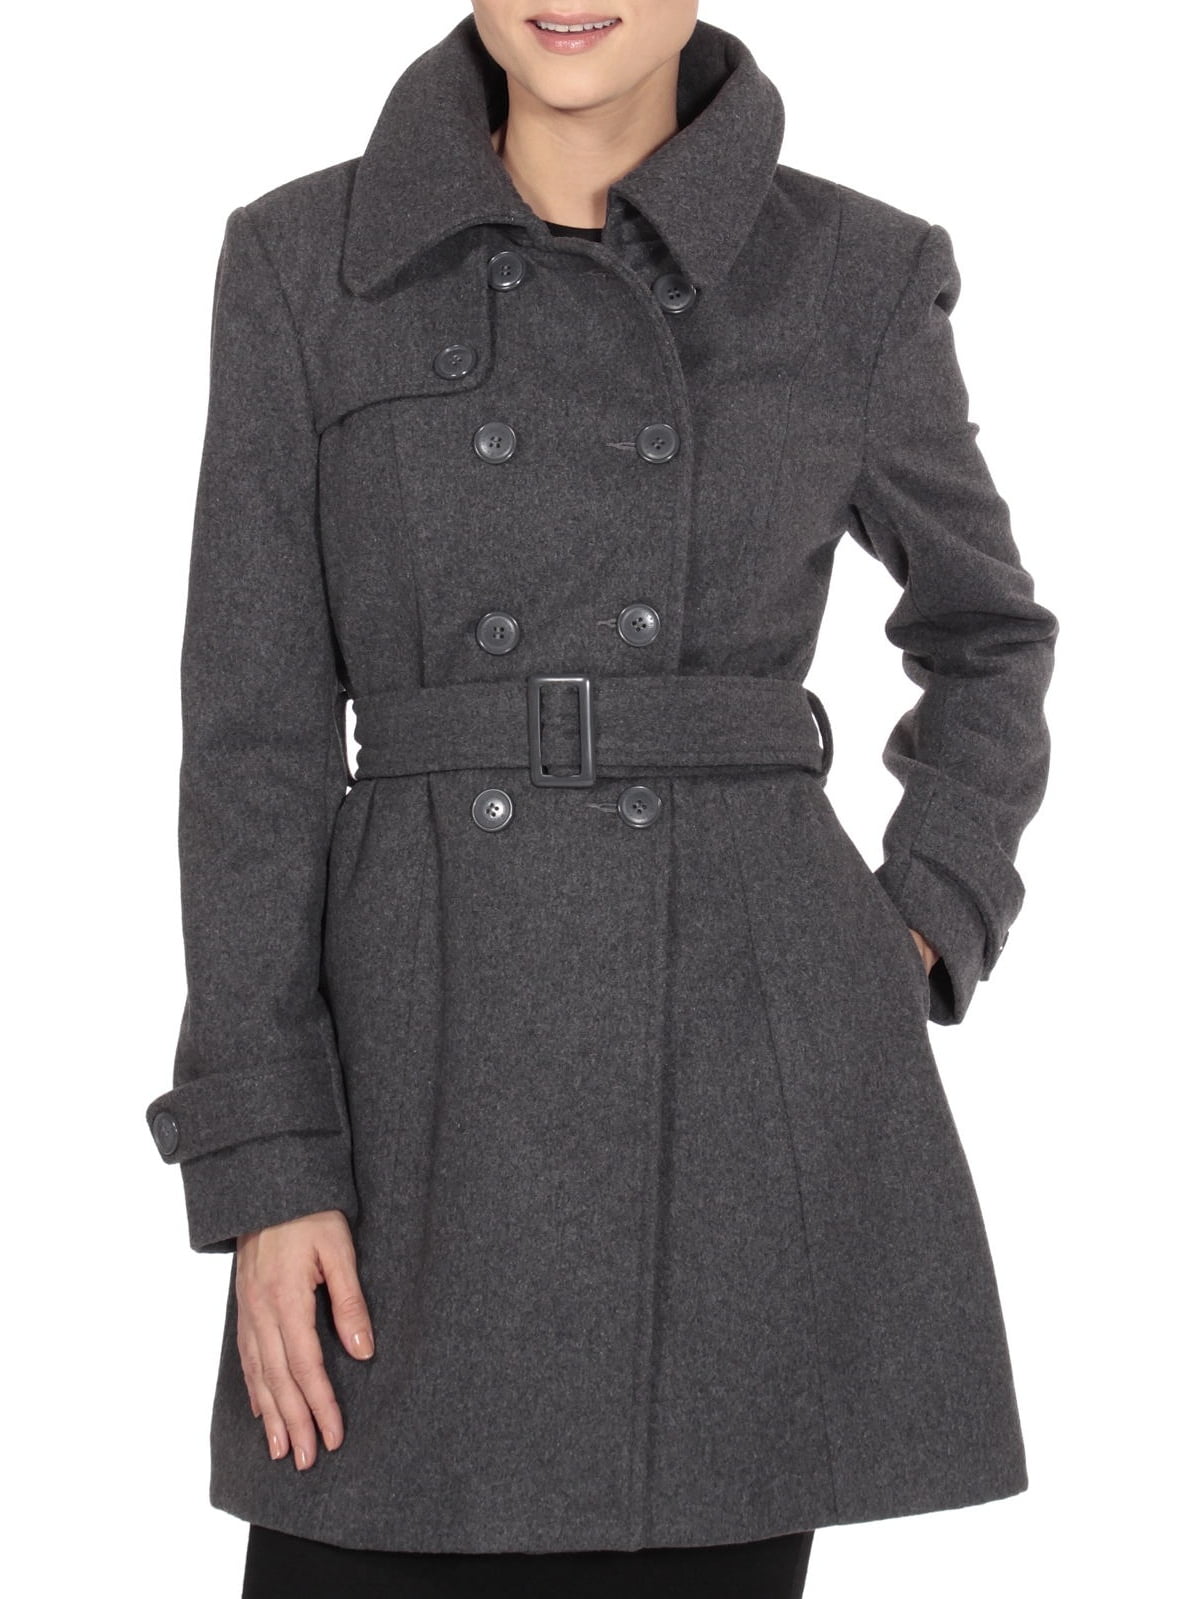 Keira Women's Trench Coat Double Breasted Wool Jacket Belted Blazer Gray 2XL